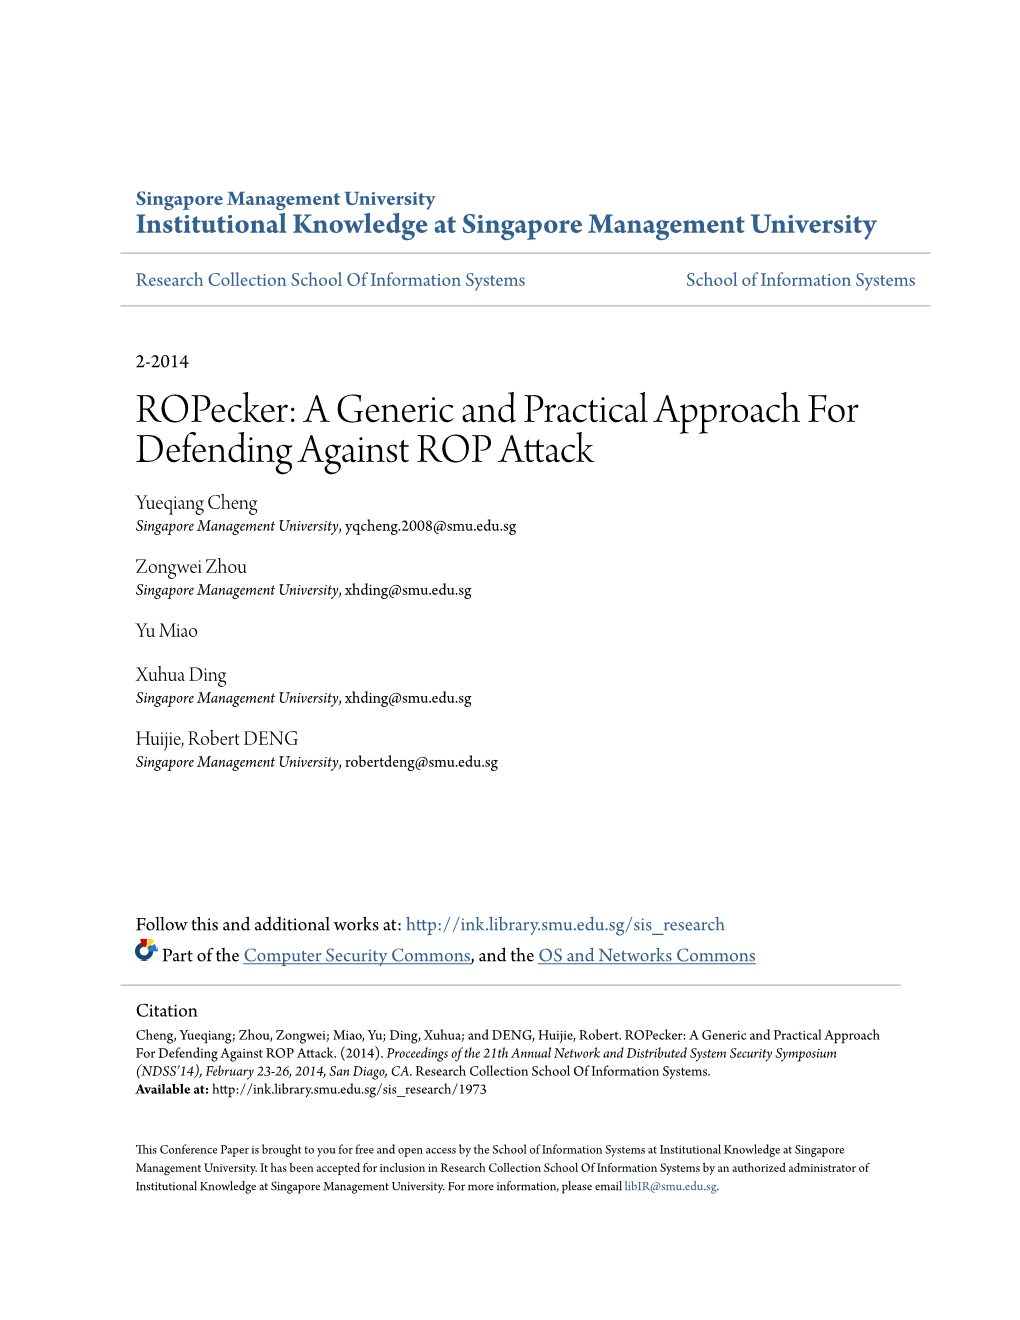 A Generic and Practical Approach for Defending Against ROP Attack Yueqiang Cheng Singapore Management University, Yqcheng.2008@Smu.Edu.Sg